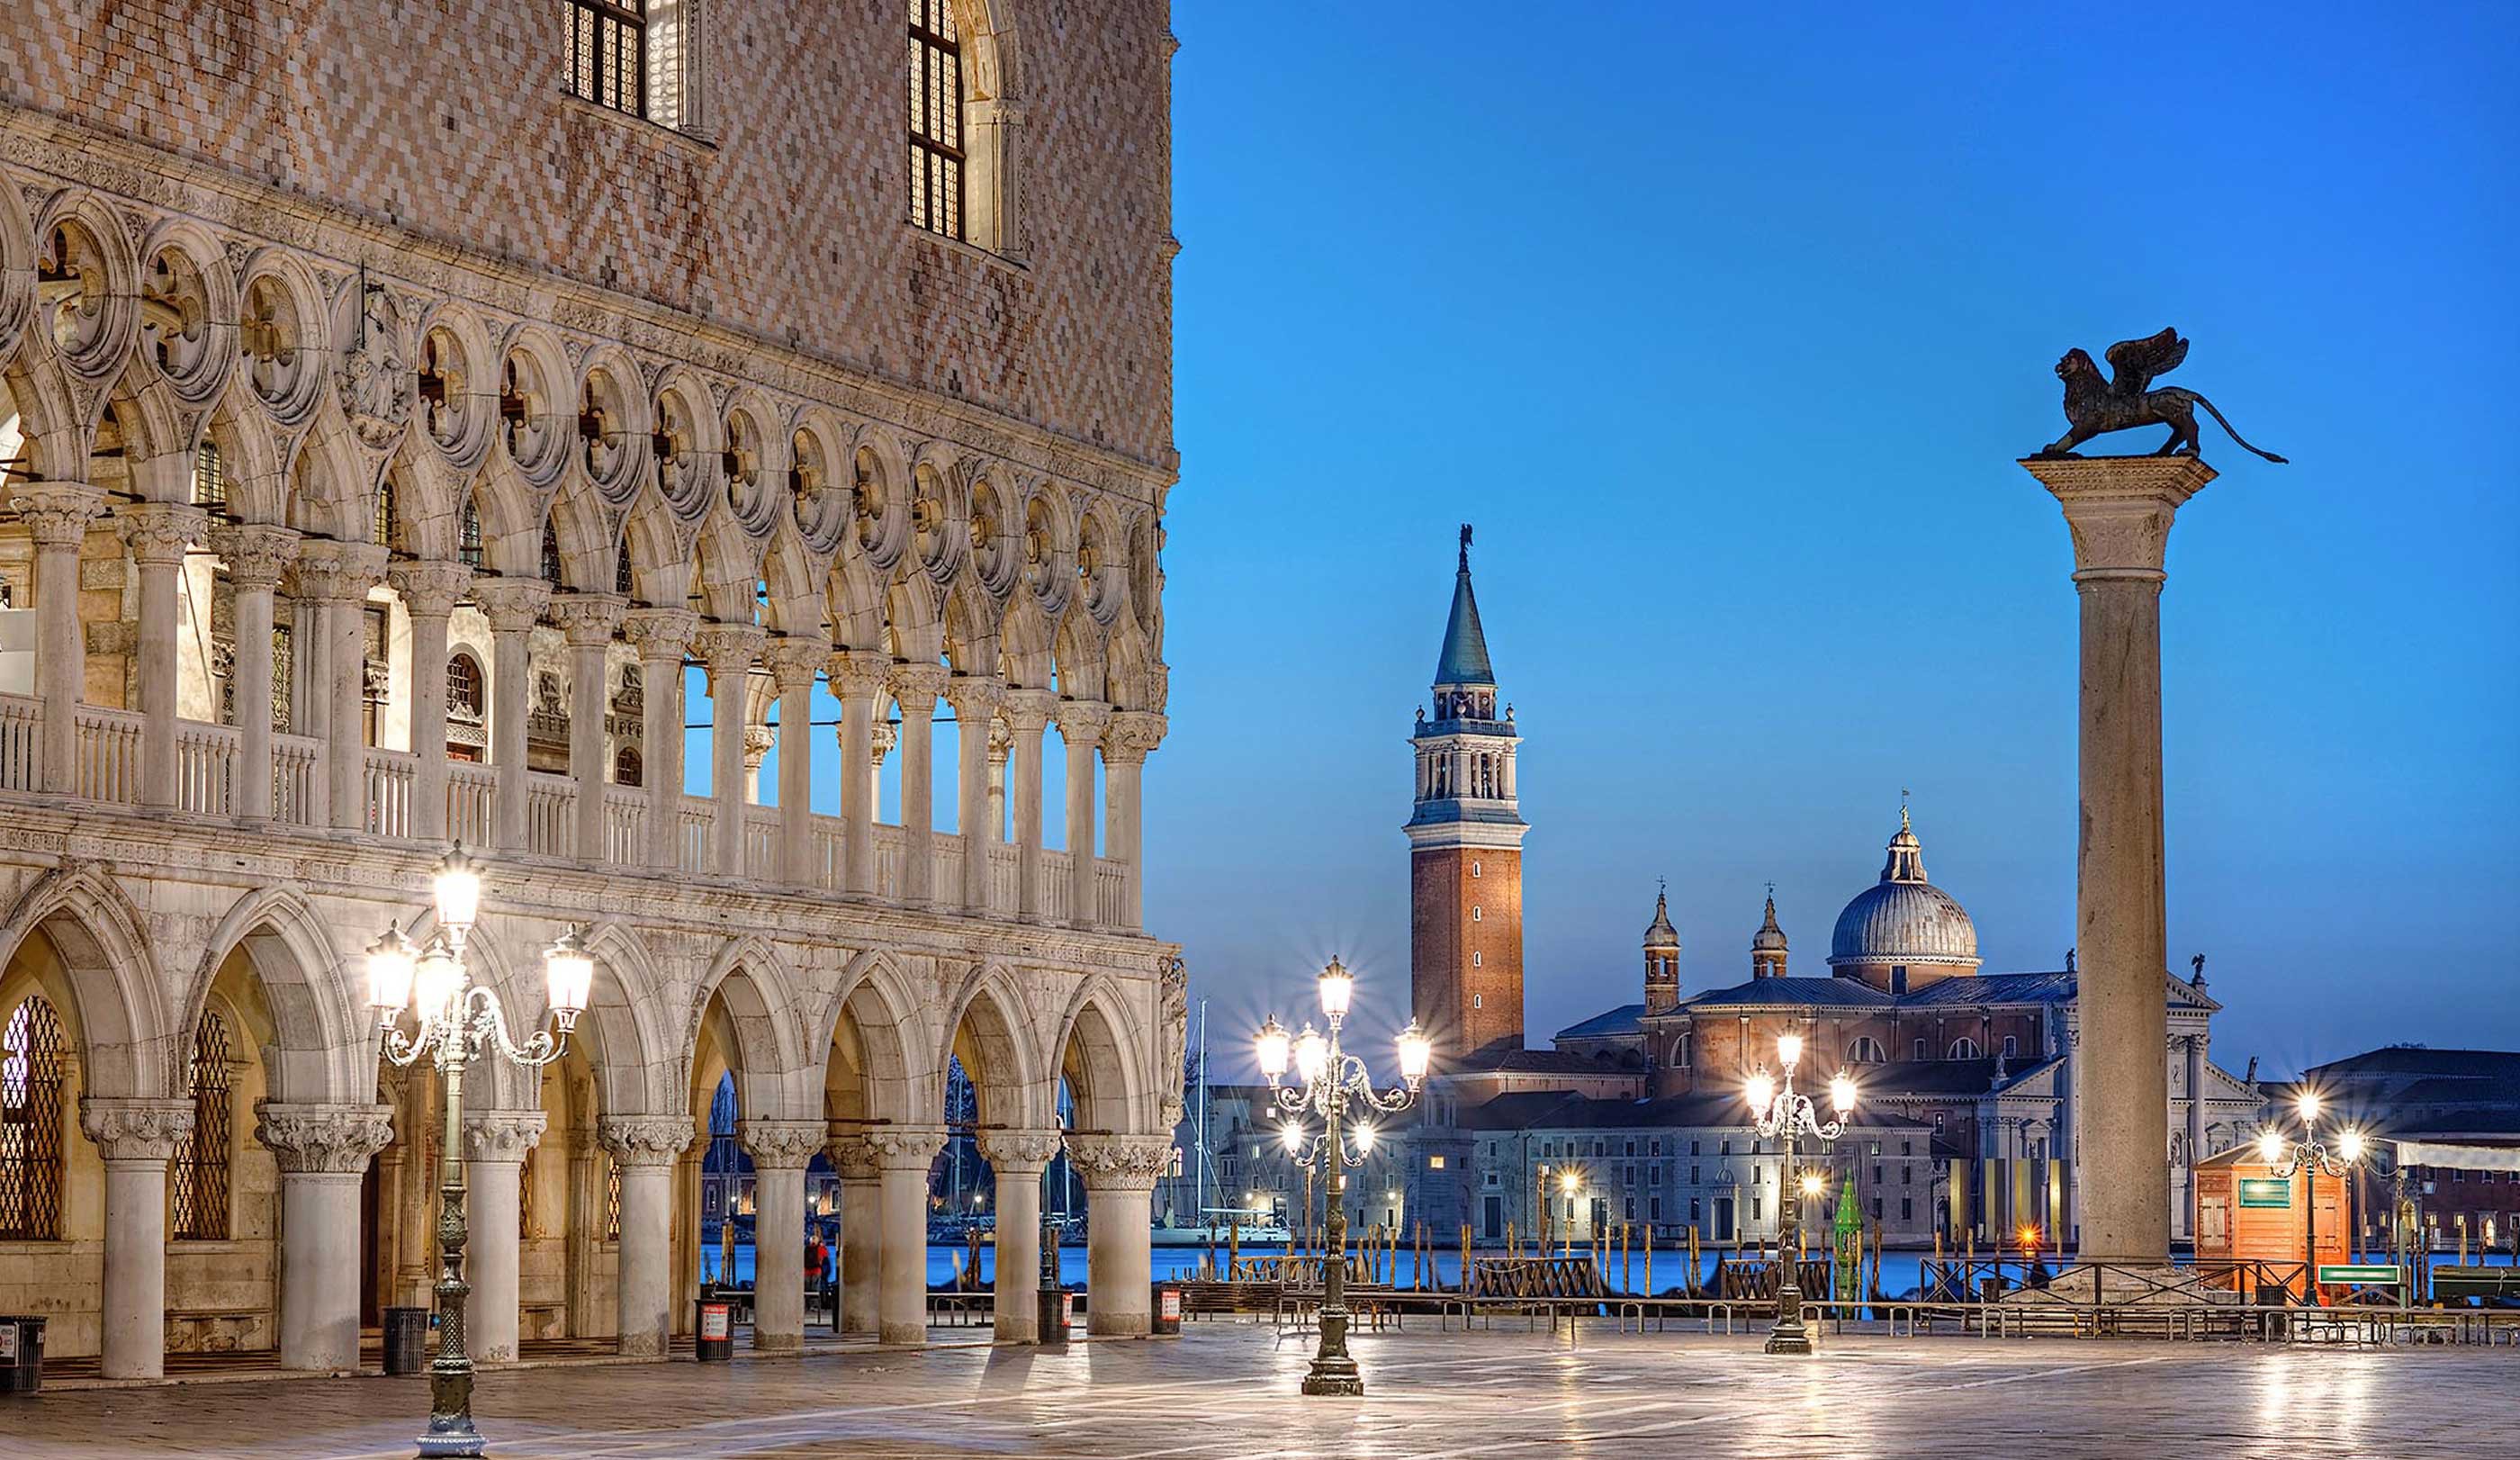 Explore some of the world's greatest cultural sites - OHH! ITALY